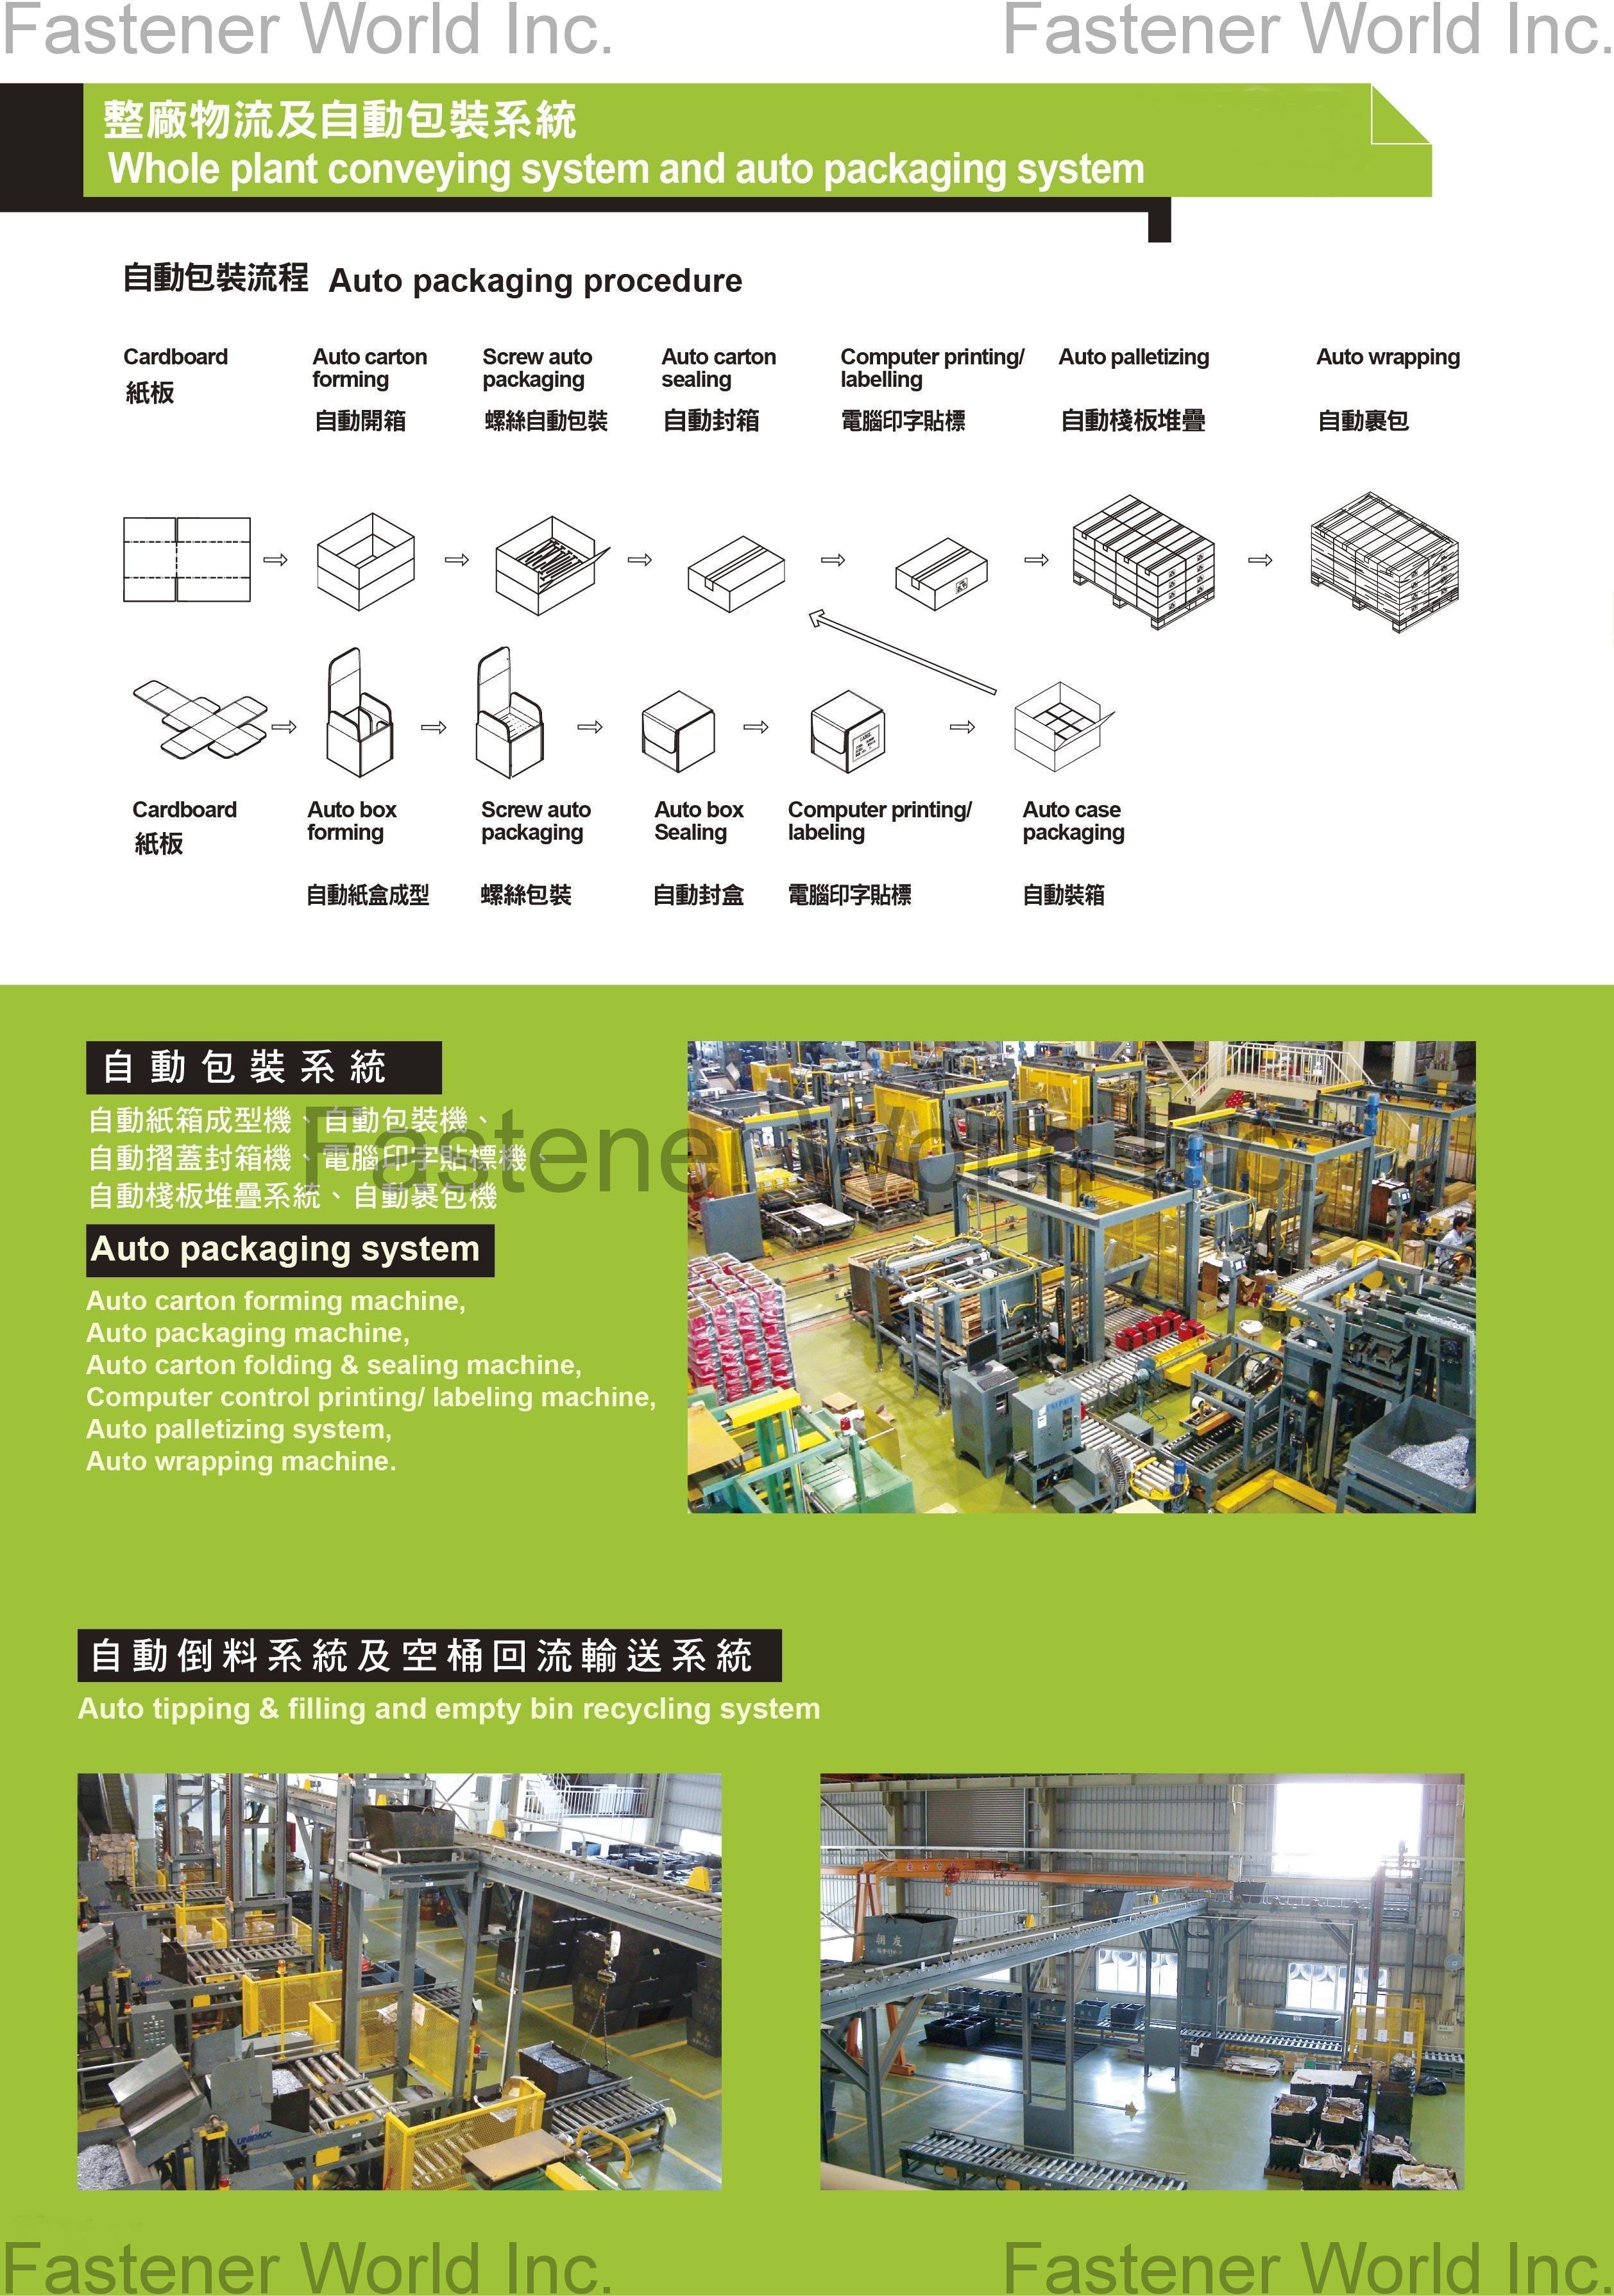 UNIPACK EQUIPMENT CO., LTD.  , Auto Carton Forming Machine, Auto Packaging Machine, Auto Carton Folding & Sealing Machine, Computer Control Printing / Labeling Machine, Auto Palletizing System, Auto Wrapping Machine, Auto Tipping & Filling and Empty Bin Recycling System , Automatic Conveying System